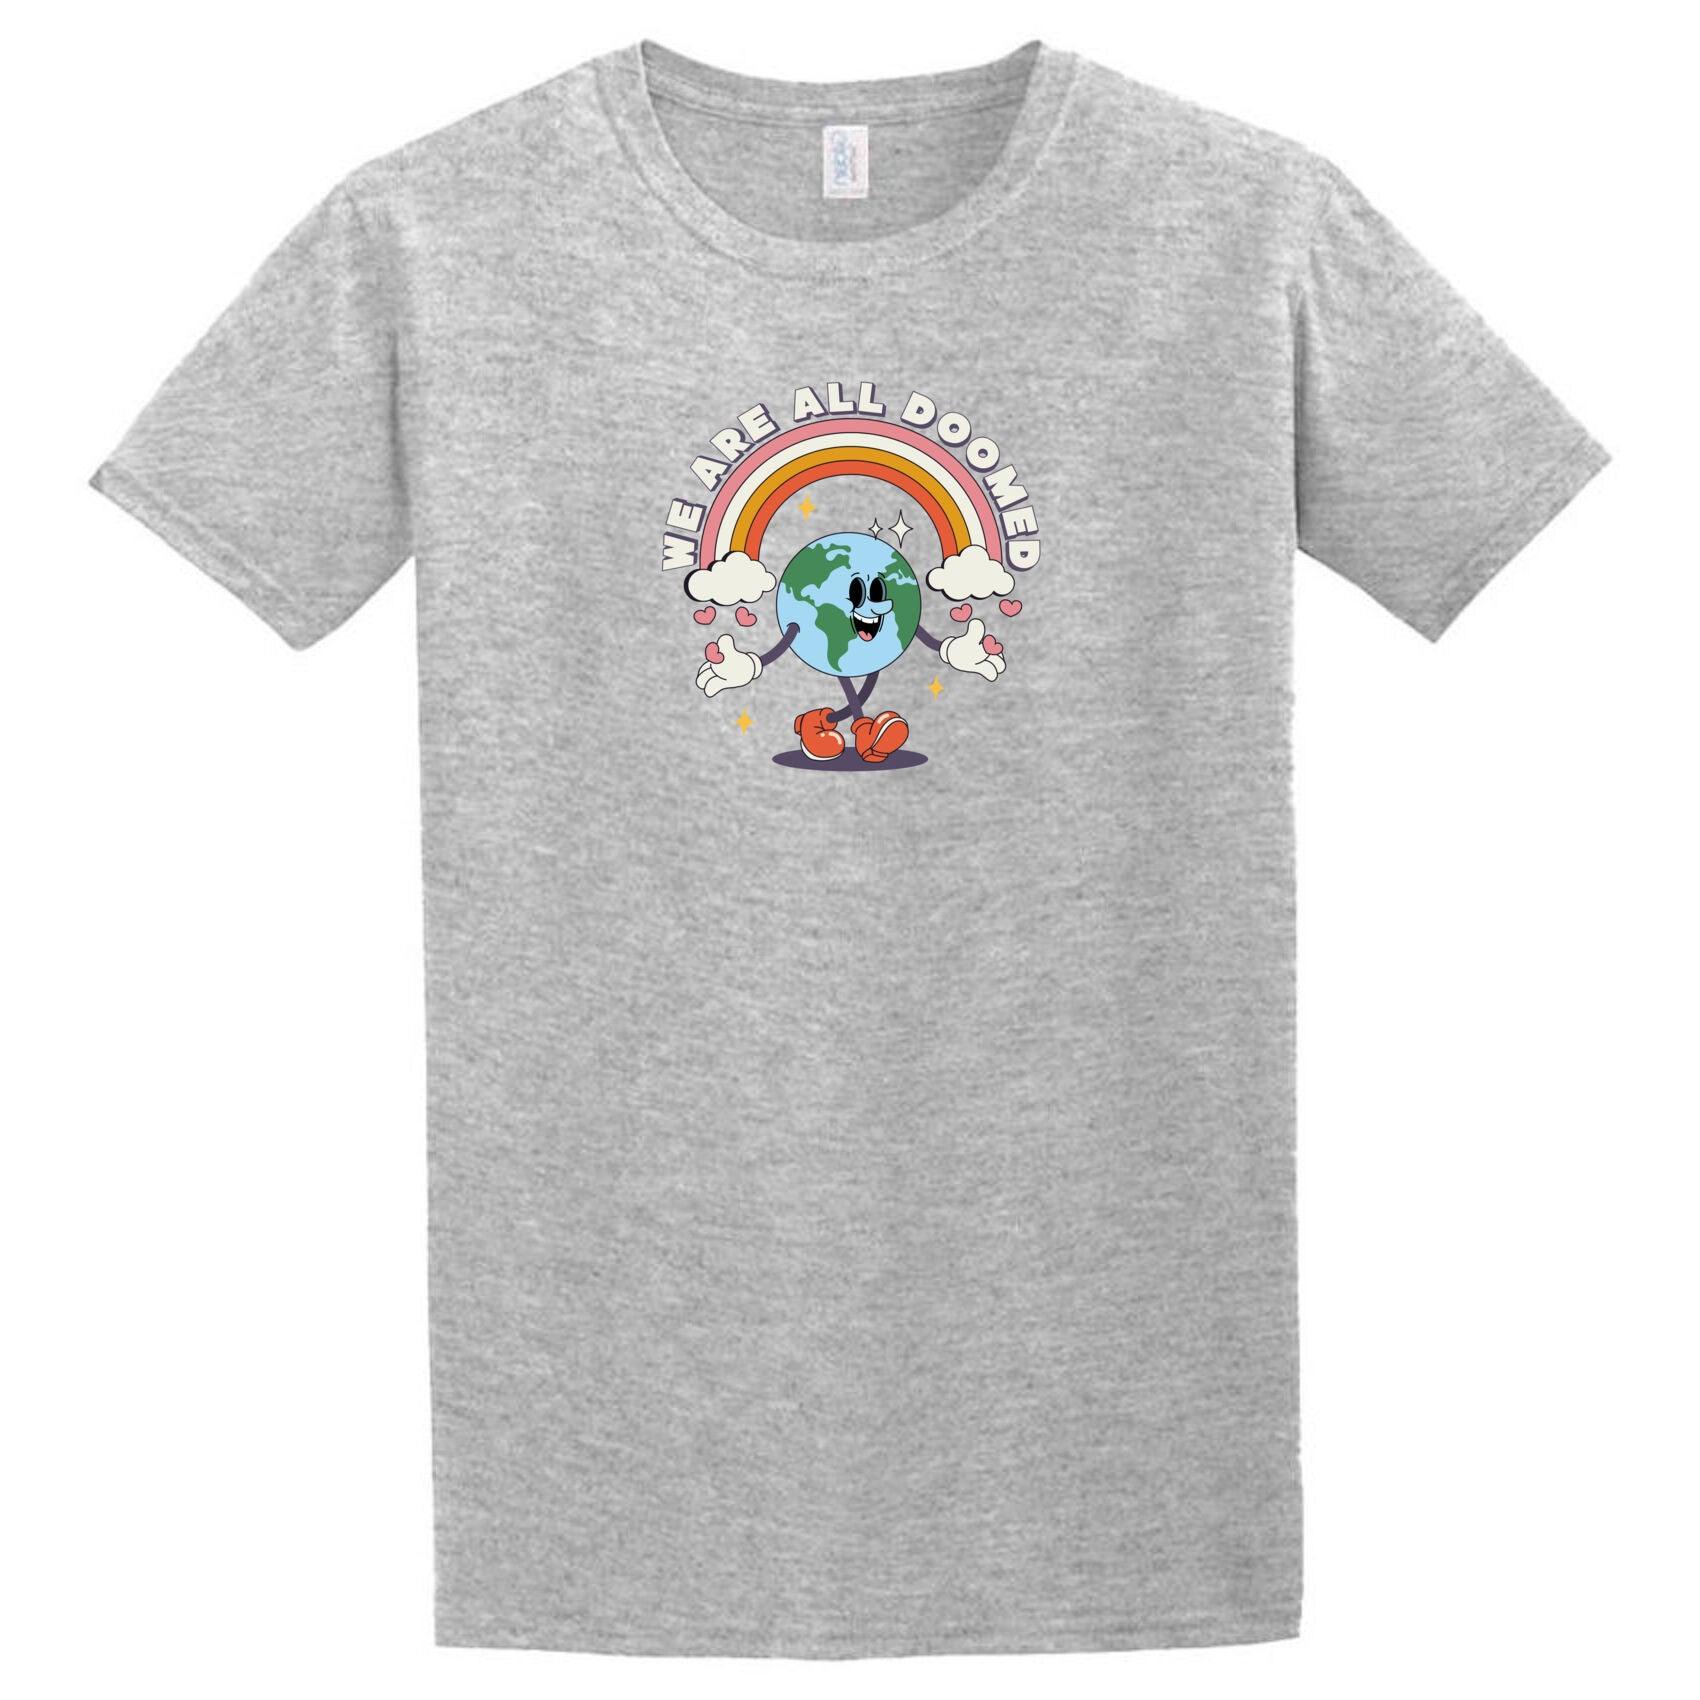 A Doomed T-Shirt with an image of an earth with a rainbow on it by Twisted Gifts.